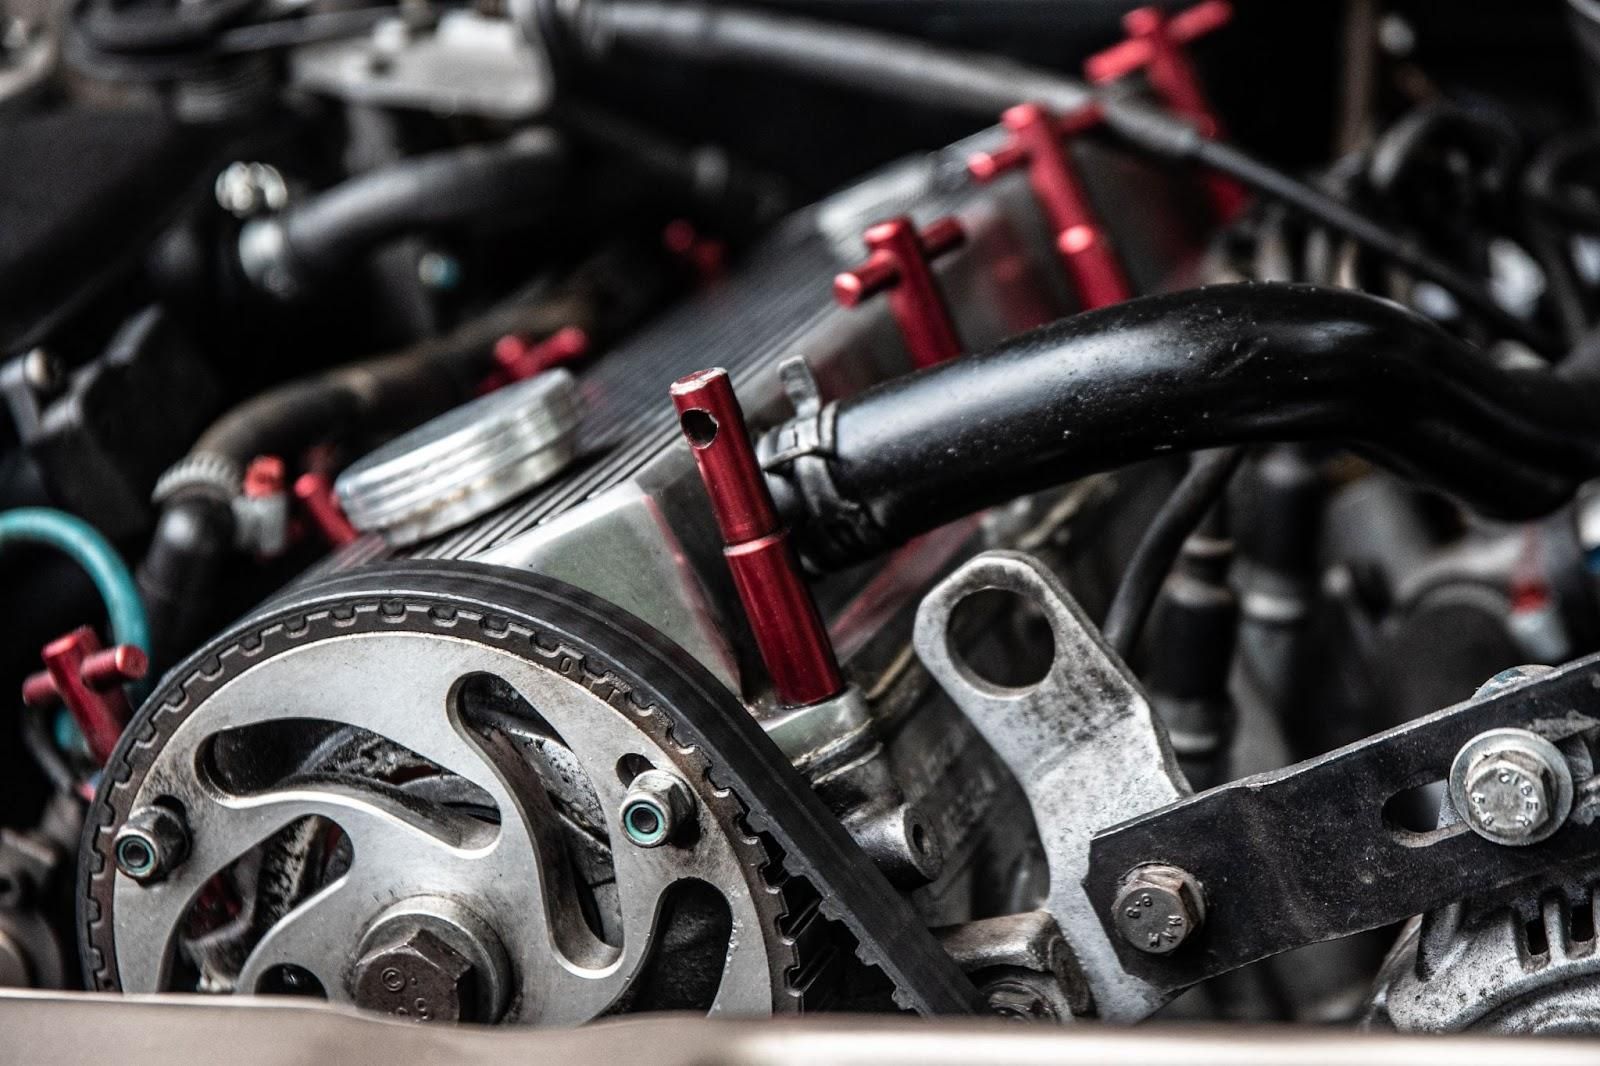 Timing Belt Service at ﻿Future Tire and Automotive﻿ in ﻿Holbrook, Lakeside, Pinetop, and Show Low, AZ﻿